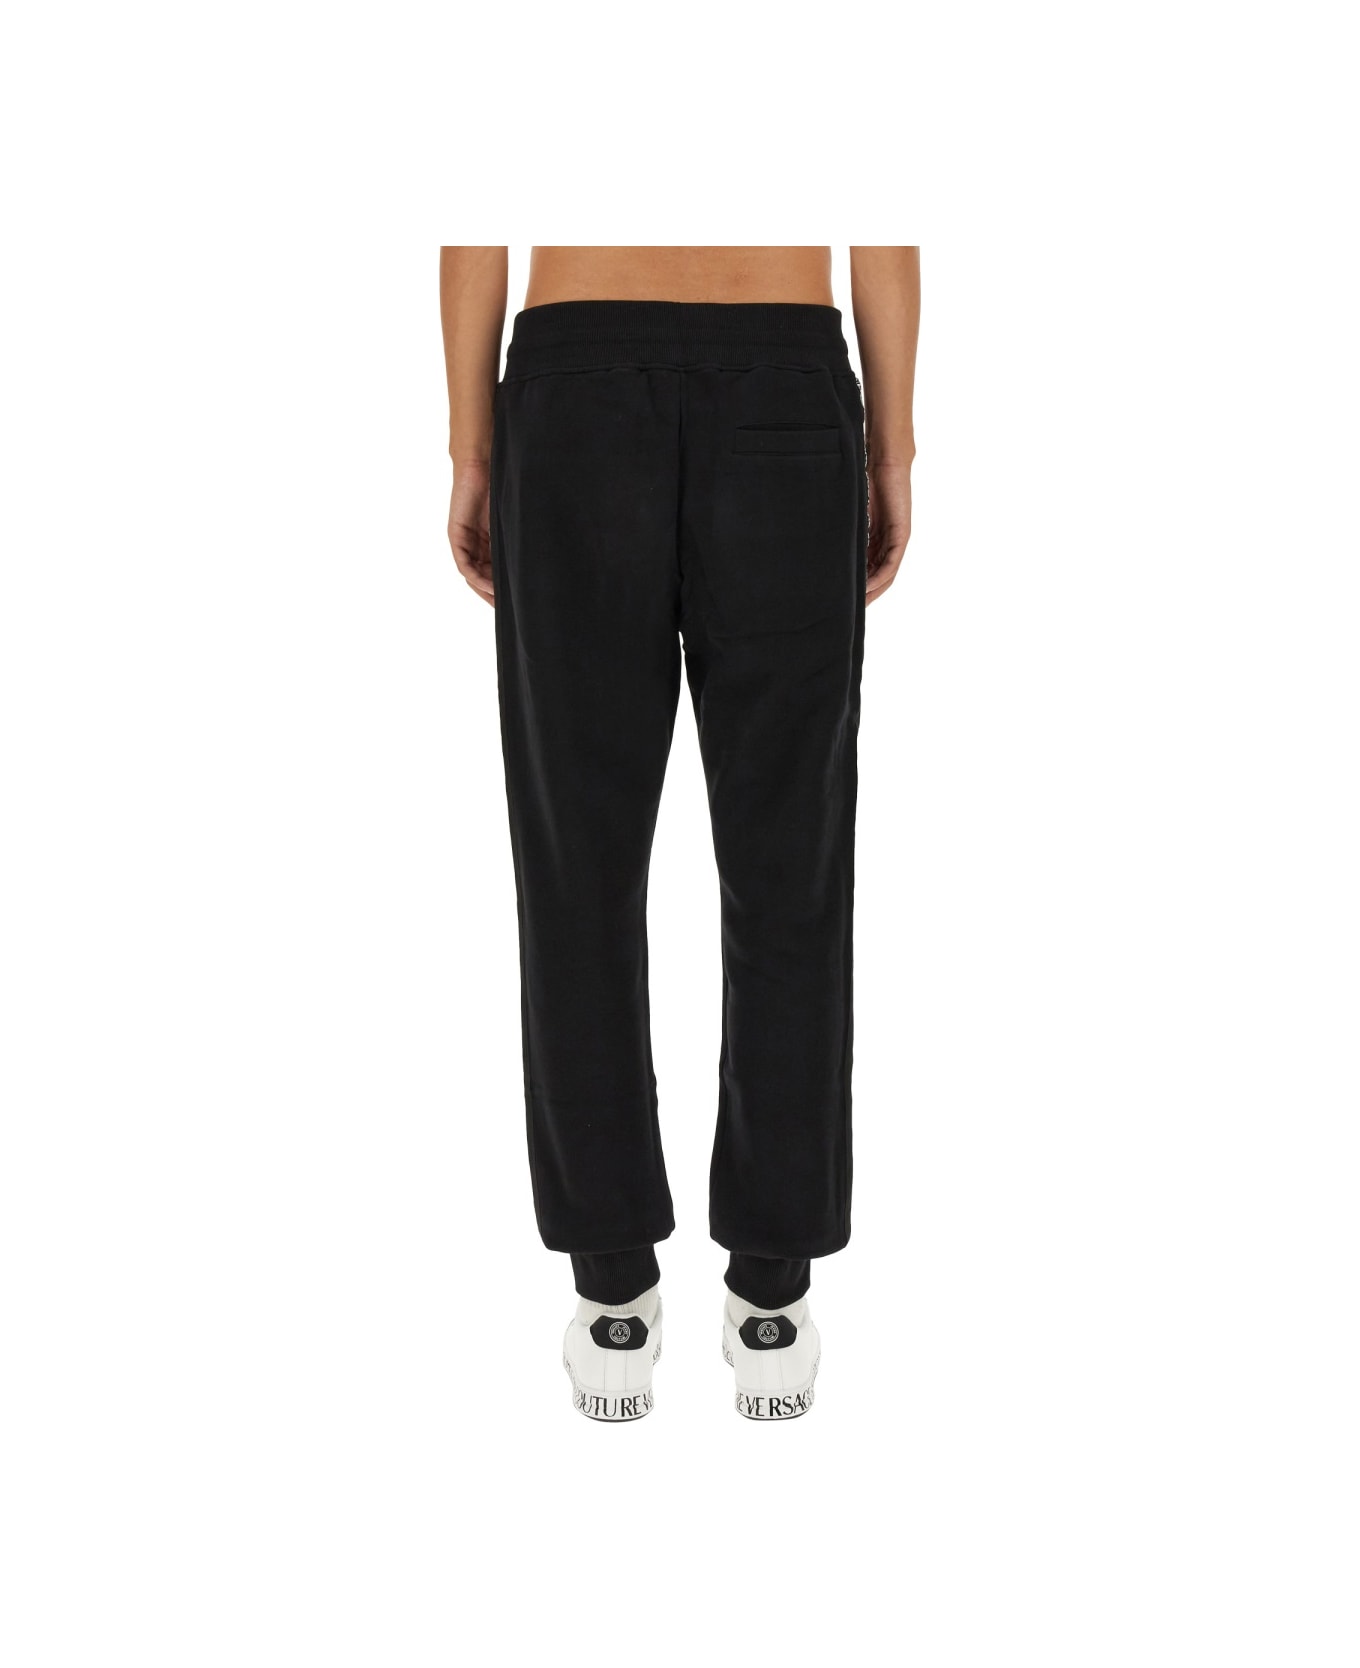 Versace Jeans Couture Sweatpants With Branded Side Stripes - BLACK